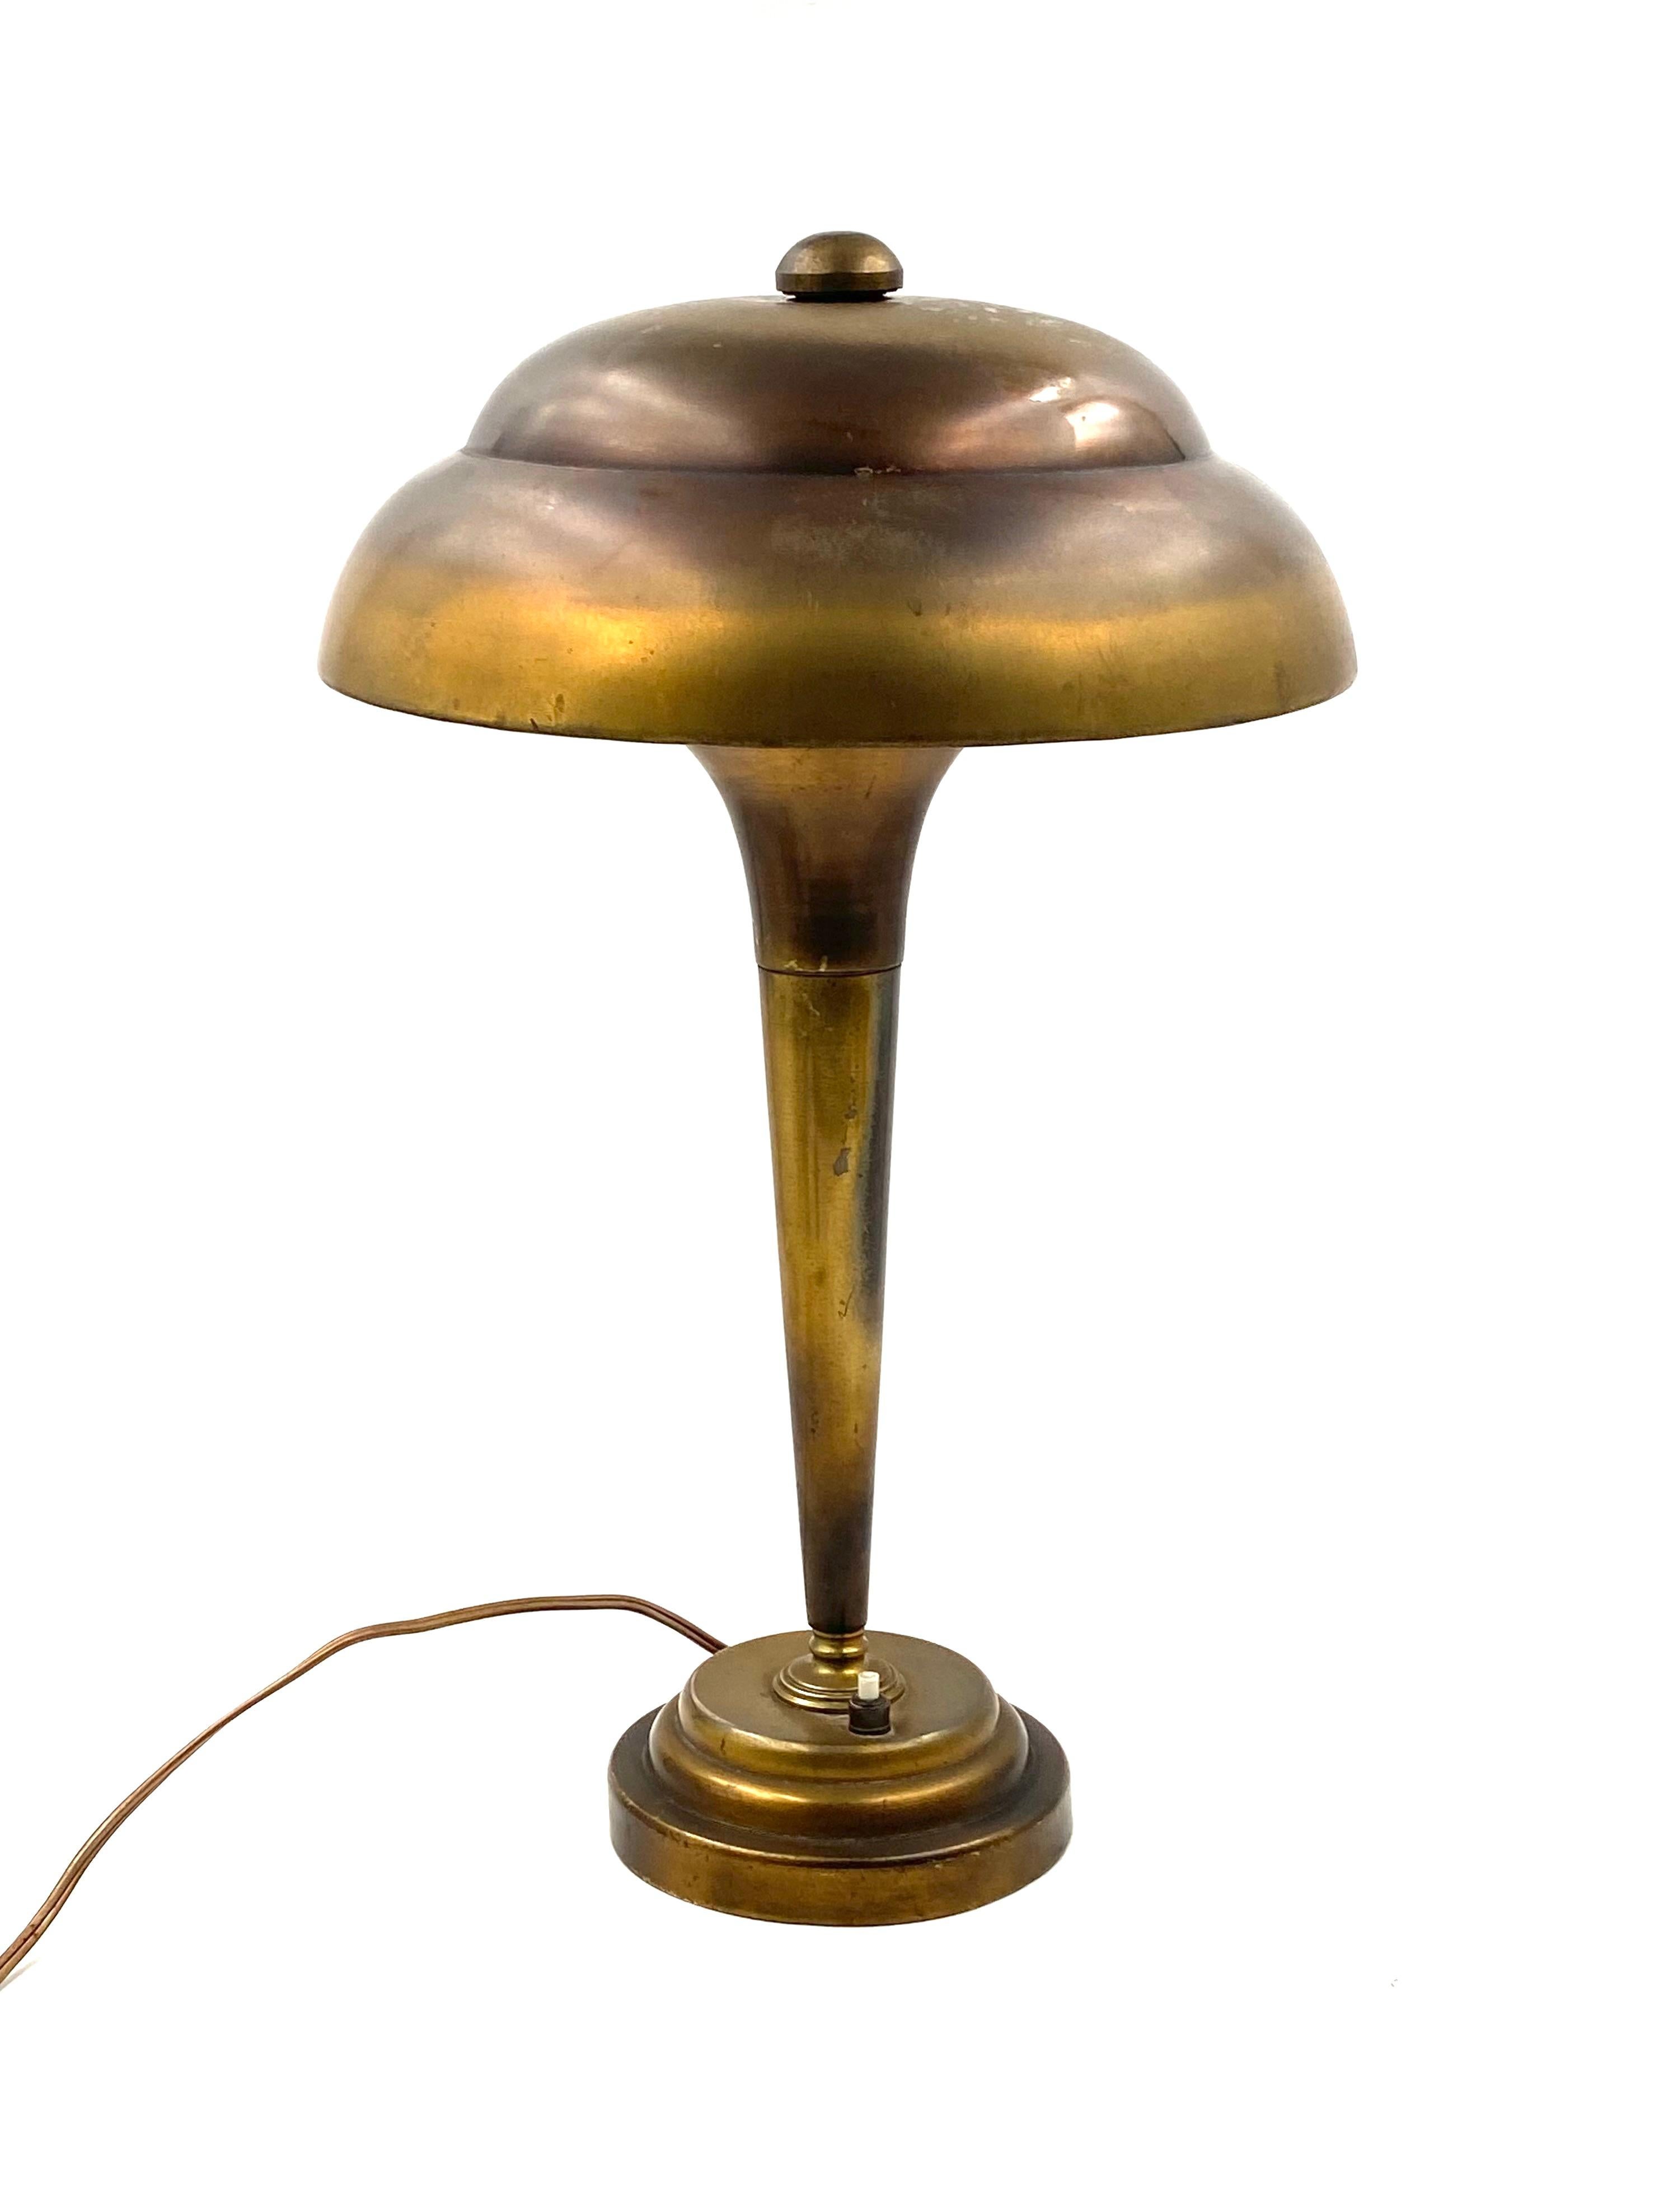 Midcentury brass table / desk lamp

France, circa 1940s

Articulating adjustable hat.

47H x 32.5 cm diam.

Conditions: very good consistent with age and use. Original condition, unrestored, brass in patina.